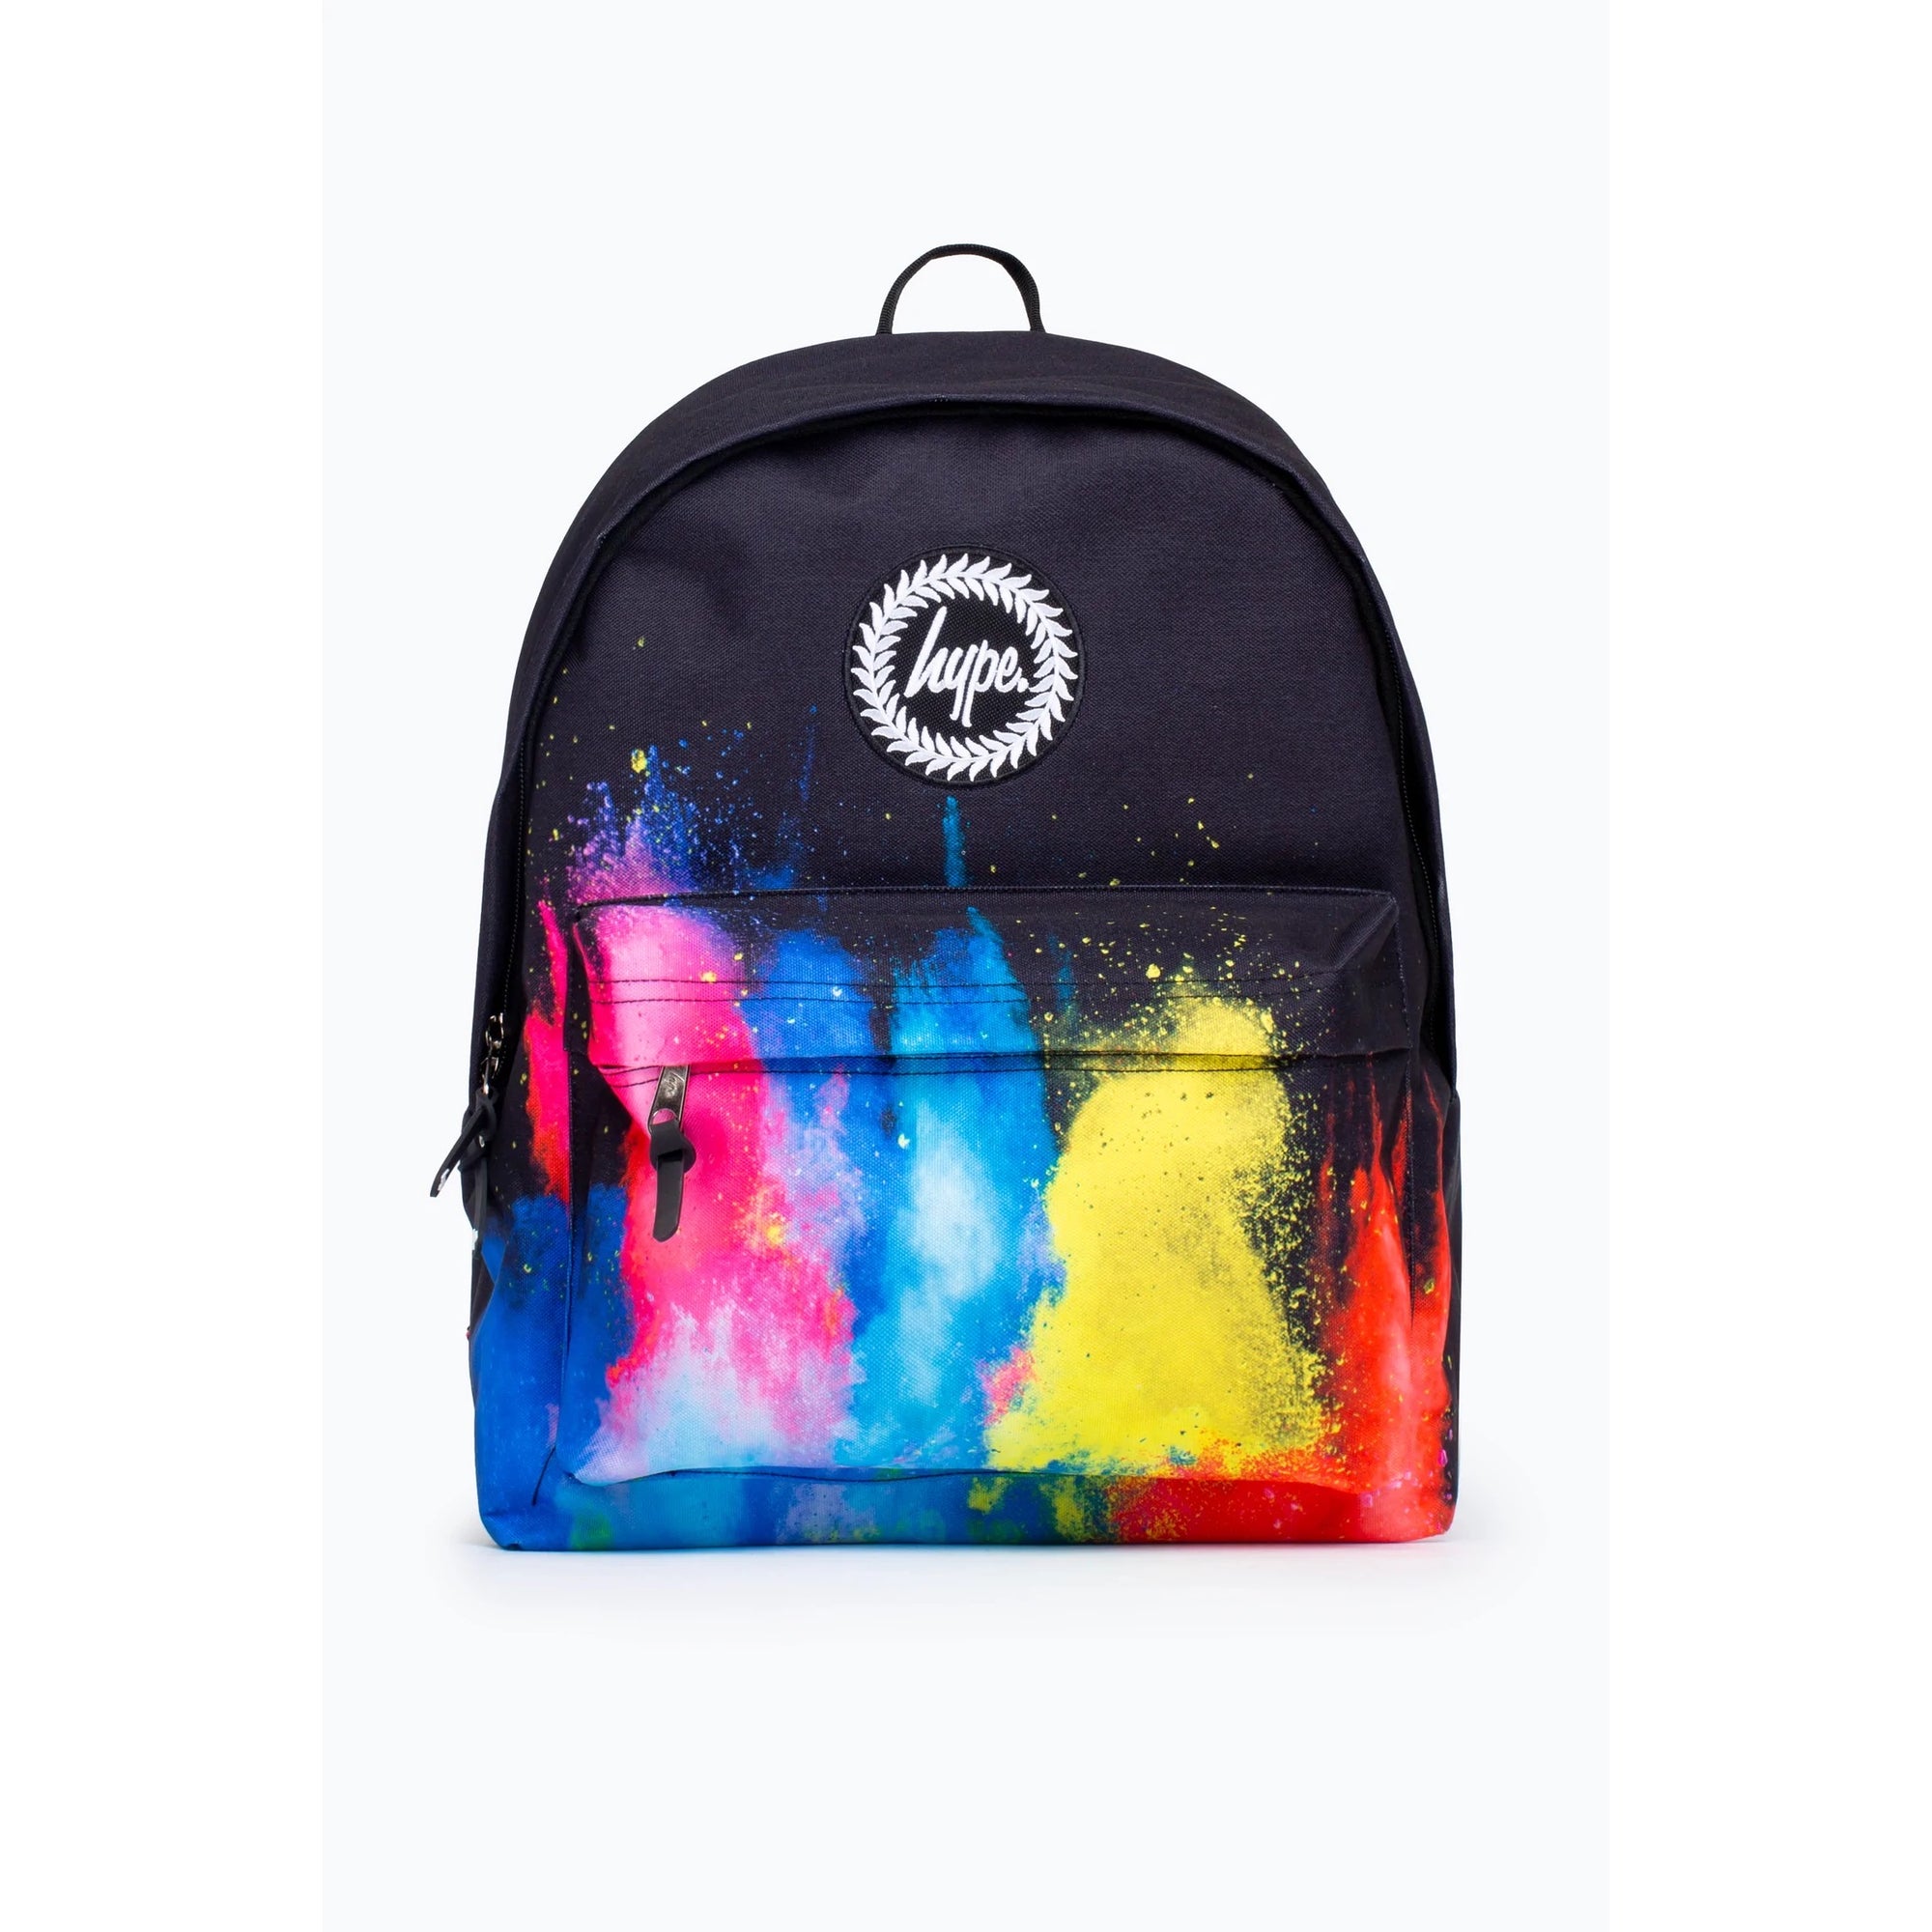 Hype Black Multi Explosion Backpack Yvlr674 Accessories ONE SIZE / Black